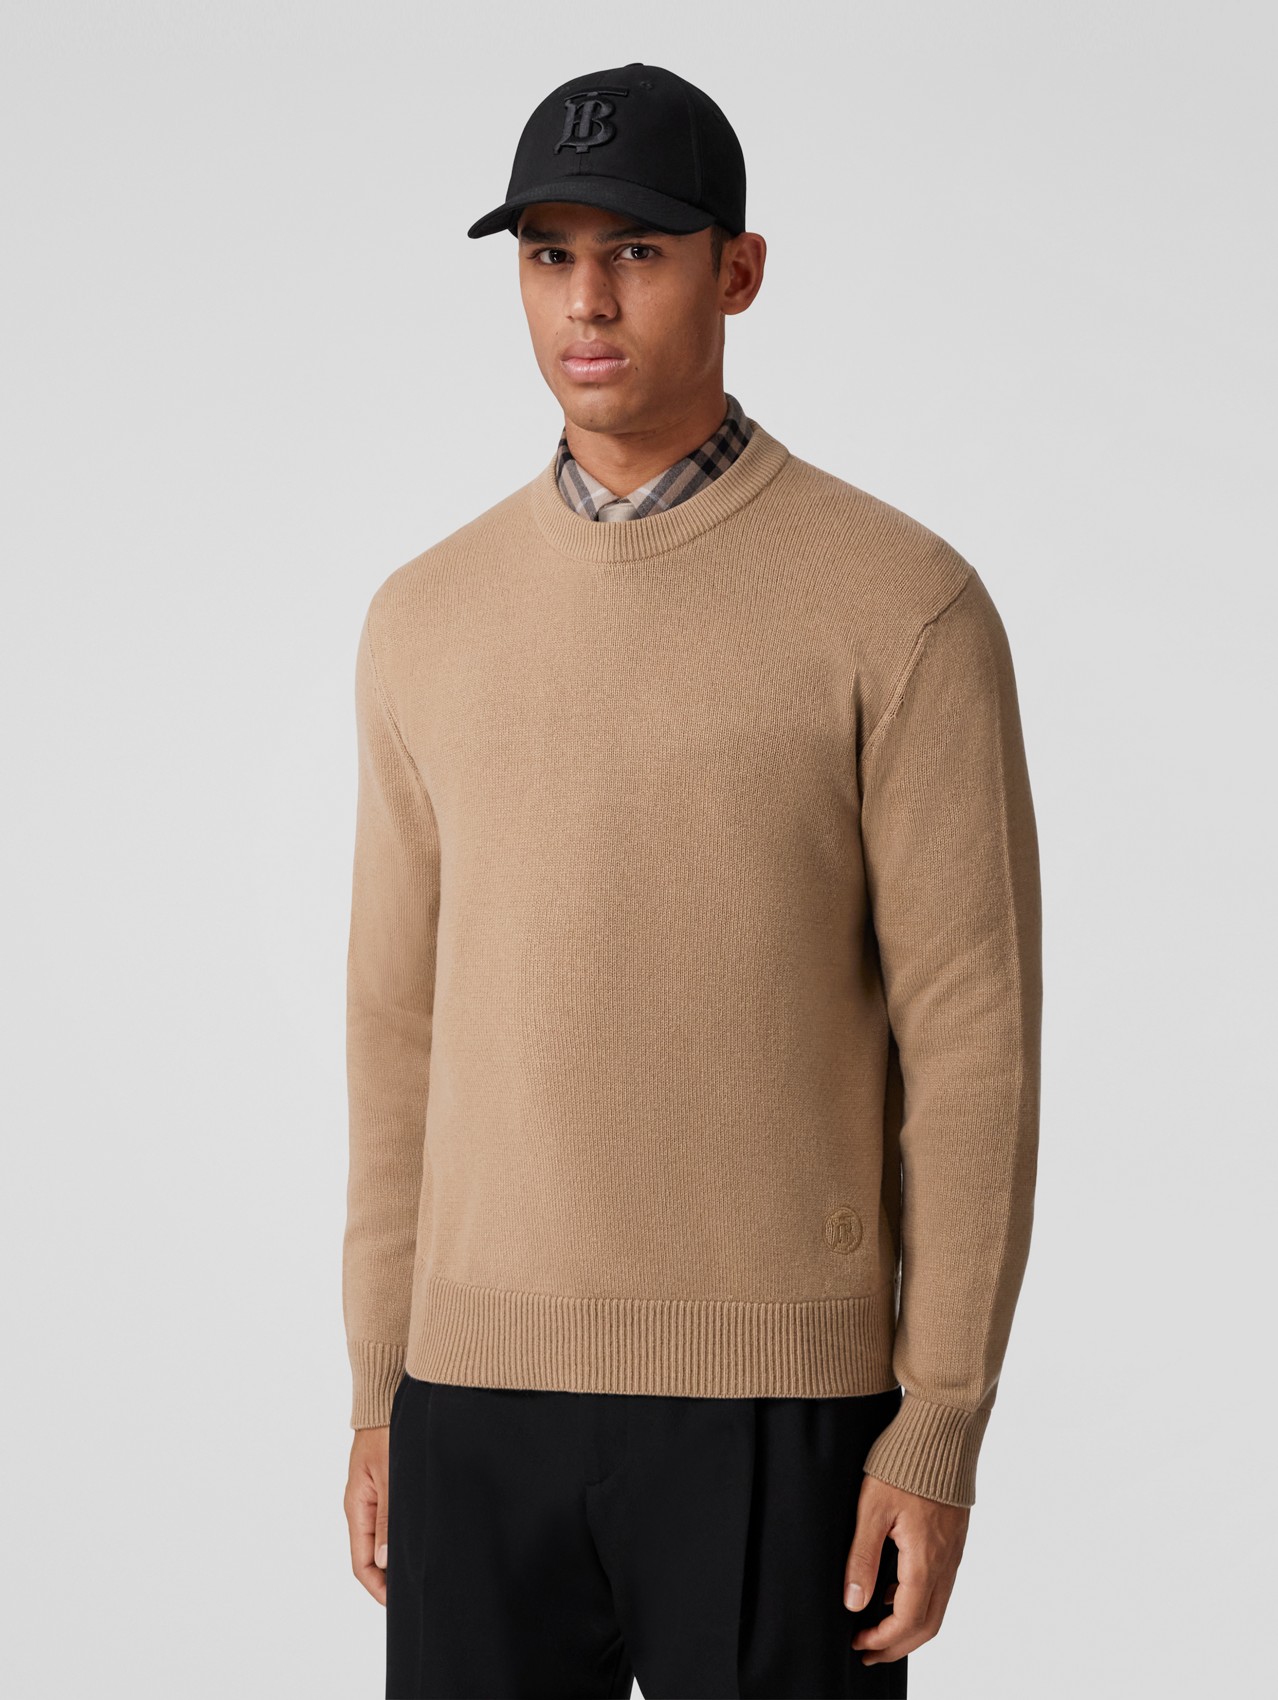 Men's Designer Knitwear | Sweaters & Cardigans | Burberry® Official